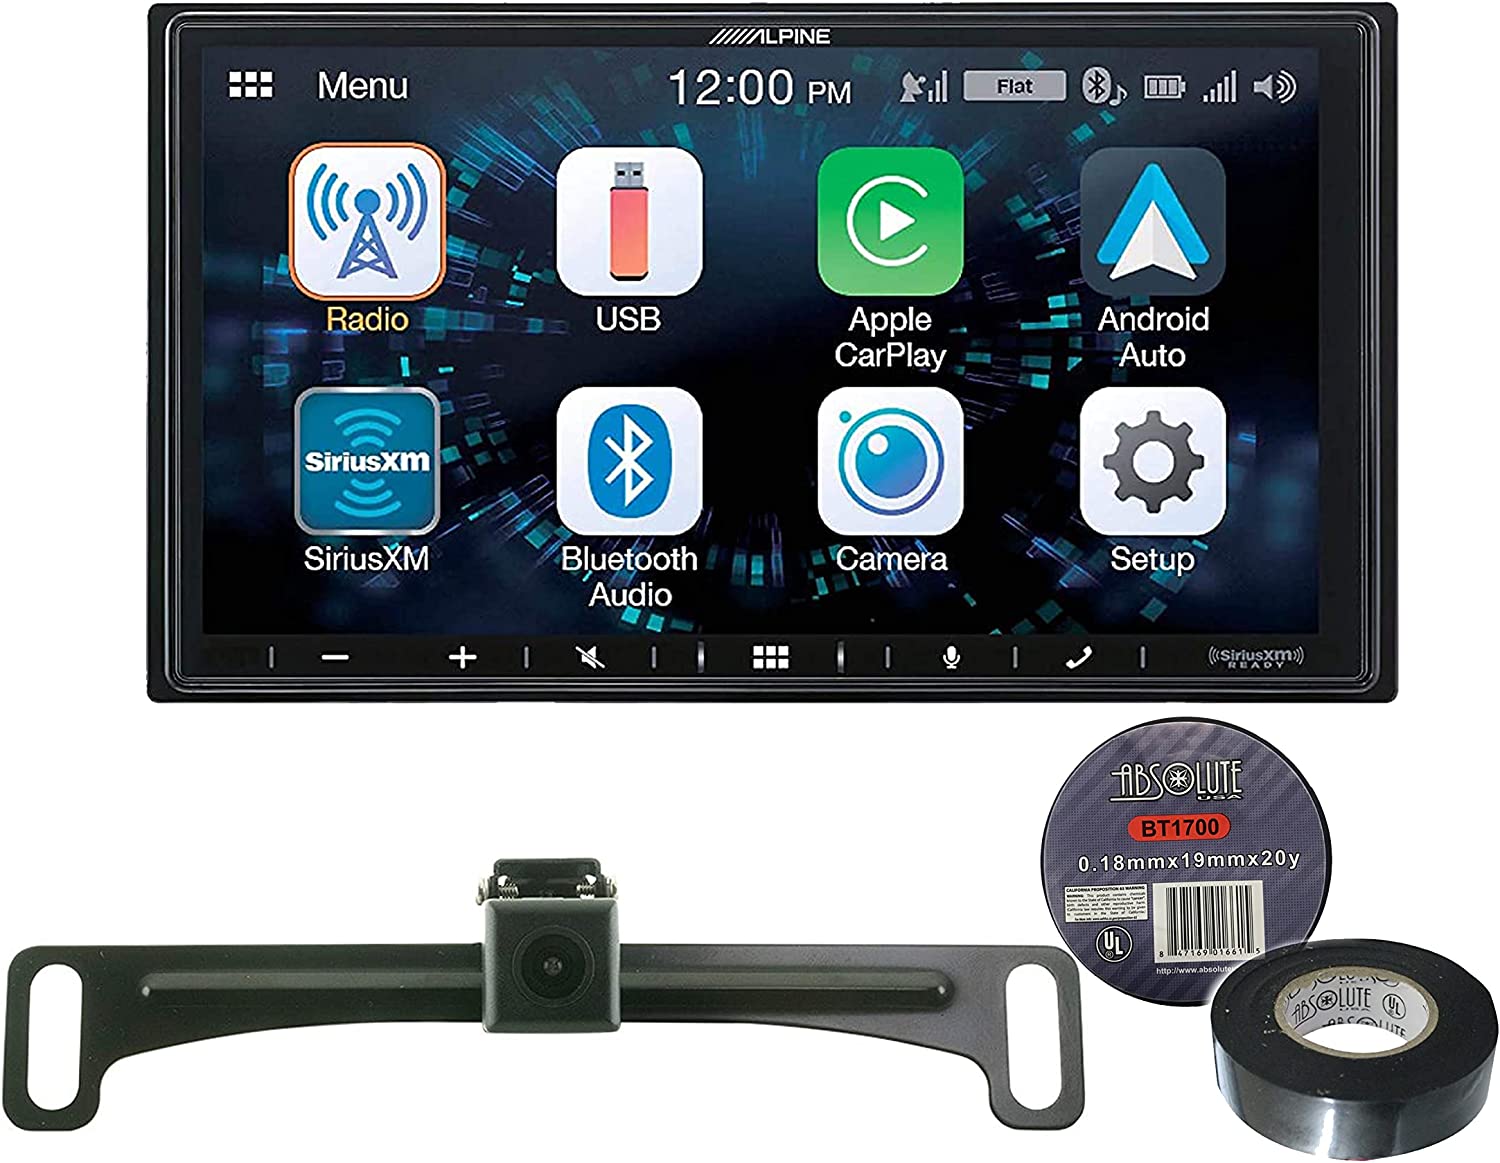 Alpine iLX-W670 7" Mech-Less Receiver Compatible with Apple CarPlay and Android Auto+Absolute CAM900 Universal Backup Camera License Plate Mount+Free Electrical Tape BT1700